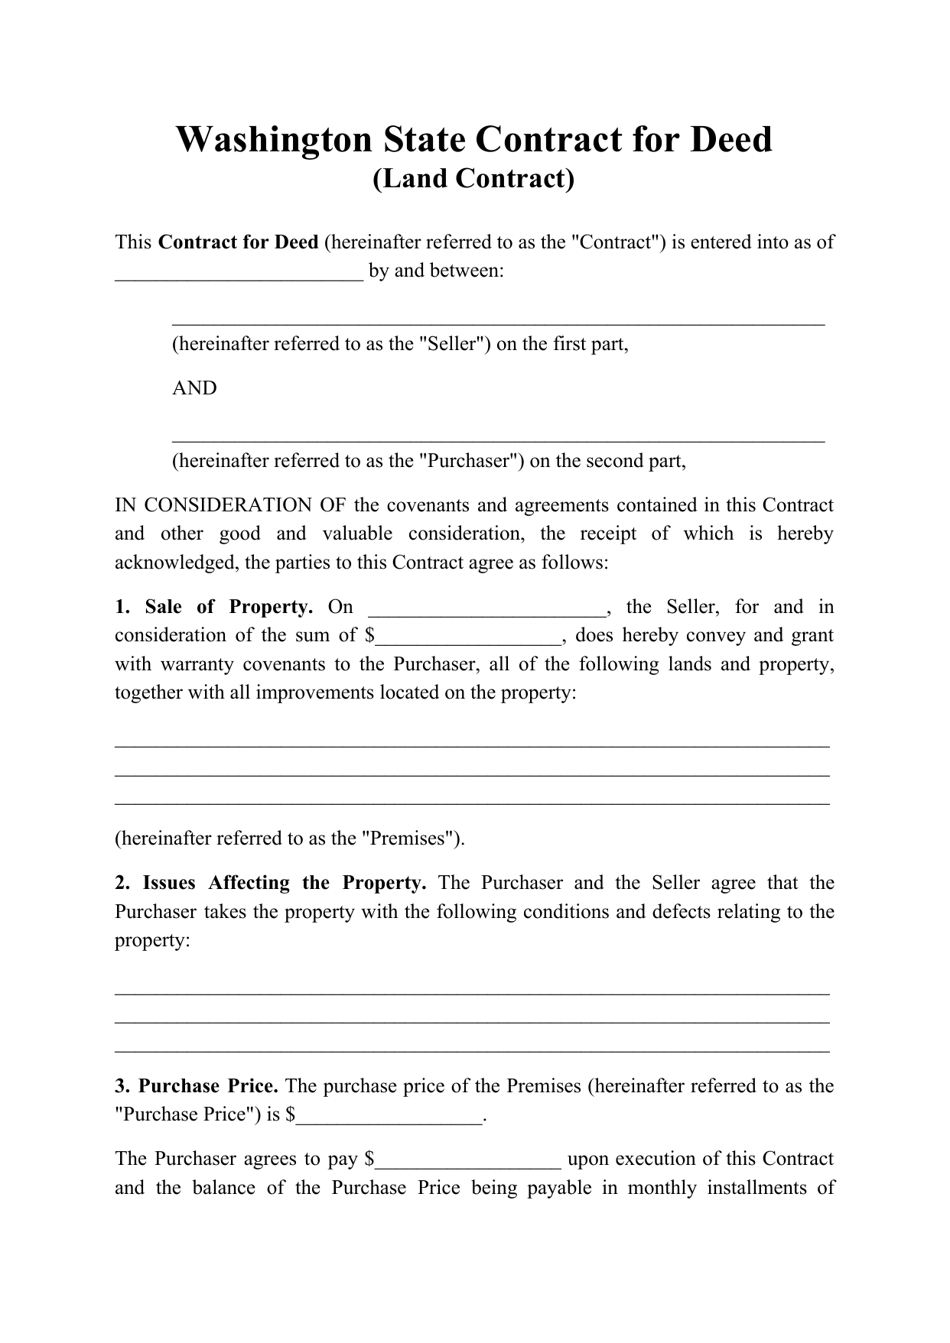 Contract for Deed (Land Contract) - Washington, Page 1